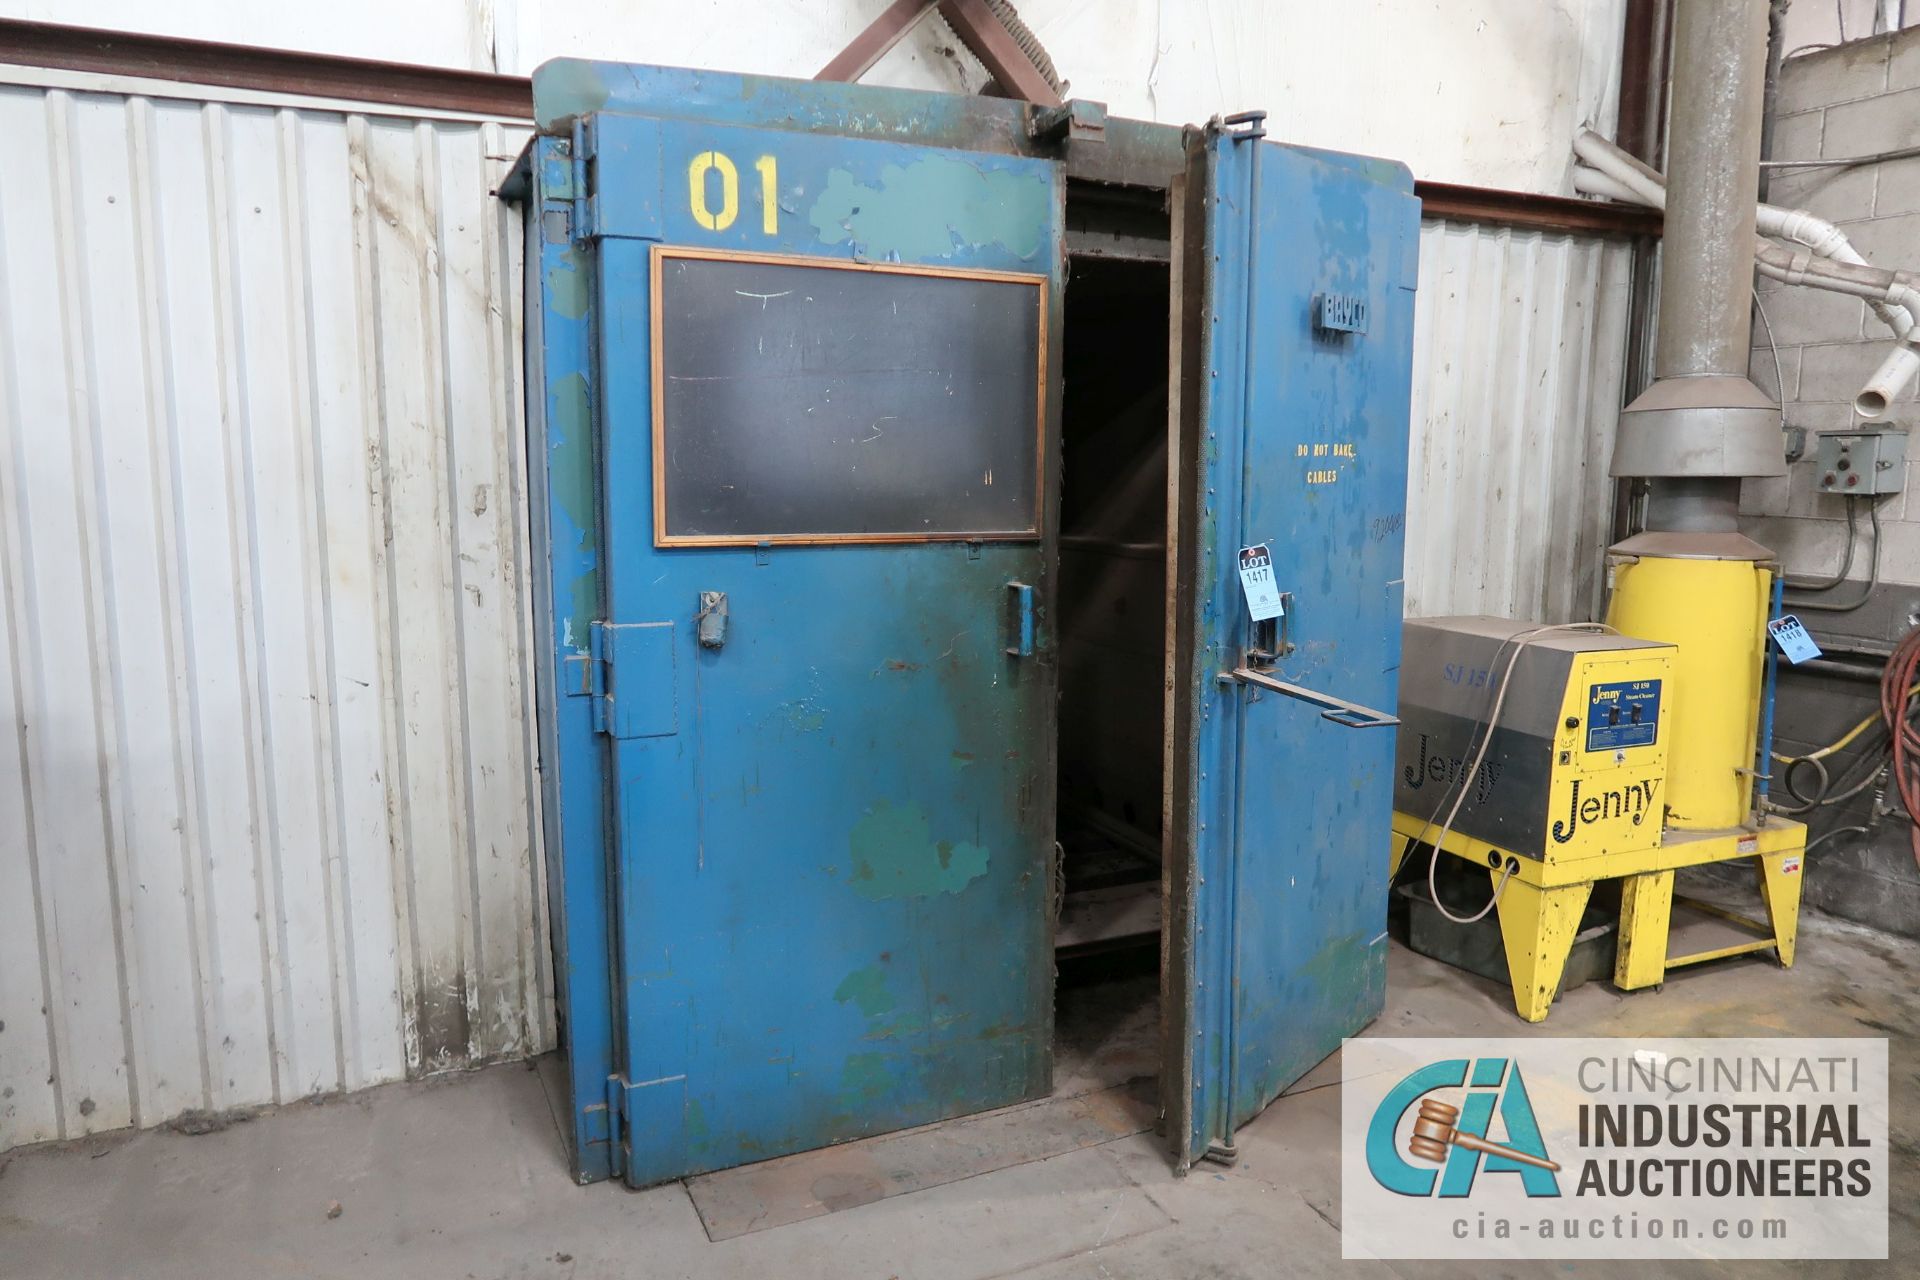 6' X 8' X 7' BAYCO NATURAL GAS FIRED OVEN **OUT OF SERVICE** **TAW WILL COVER OPENING IN WALL**